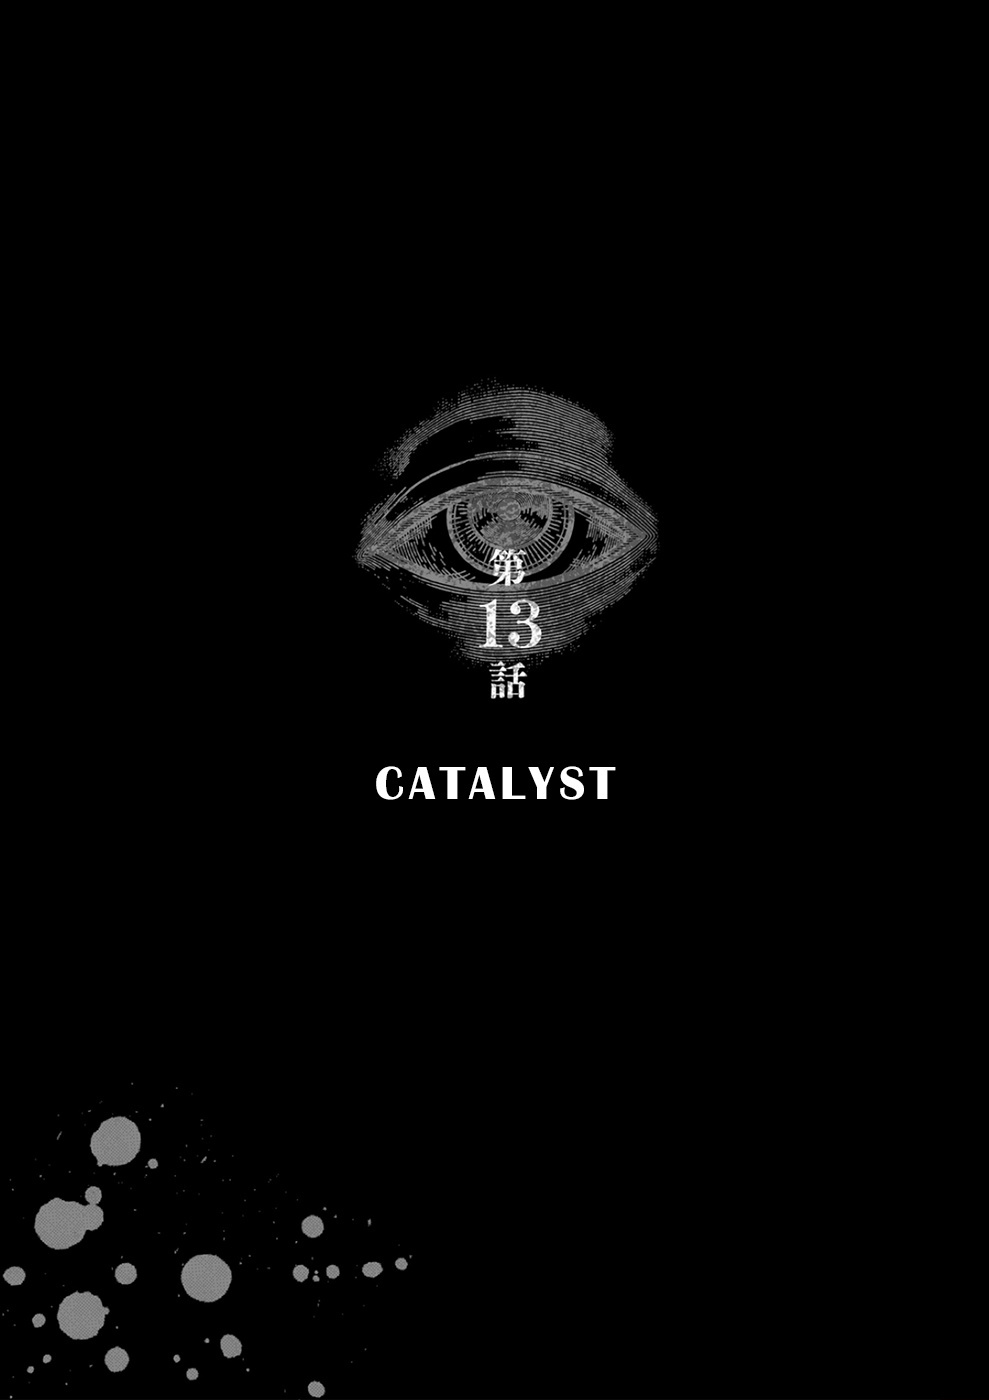 24 Of My Students In My Class Died In One Night Vol.3 Chapter 13: Catalyst - Picture 1